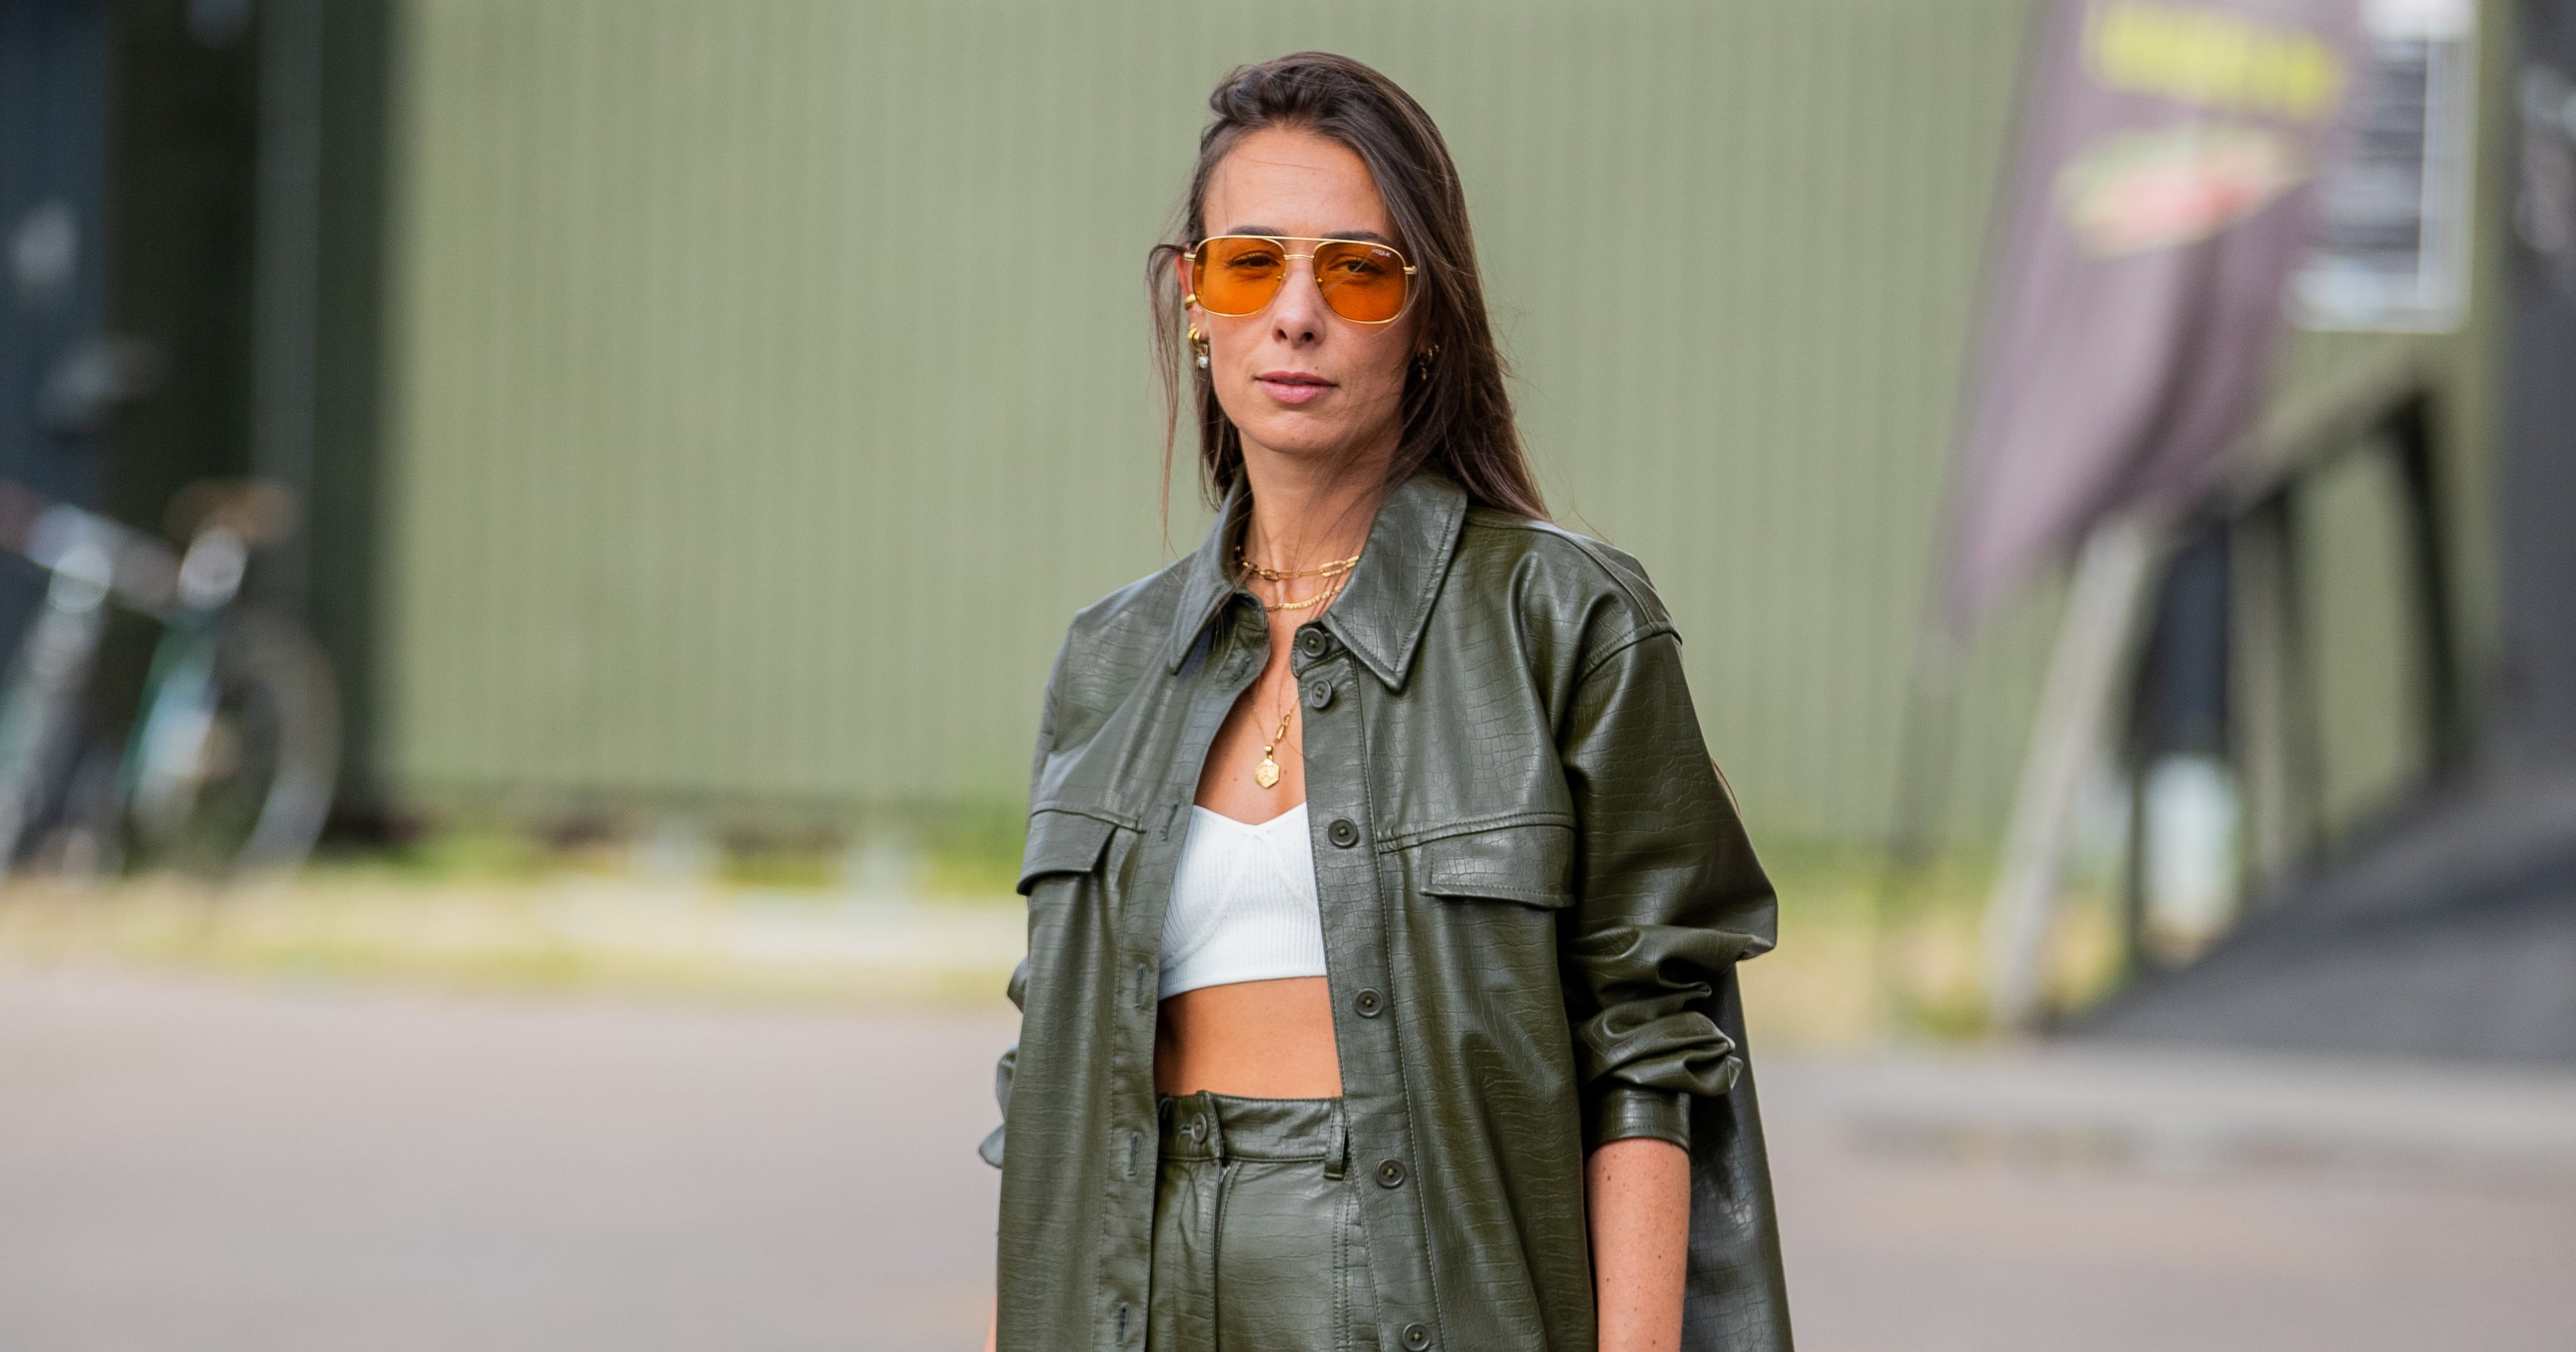 23 Cool Leather Outfit Ideas to Try in 2022